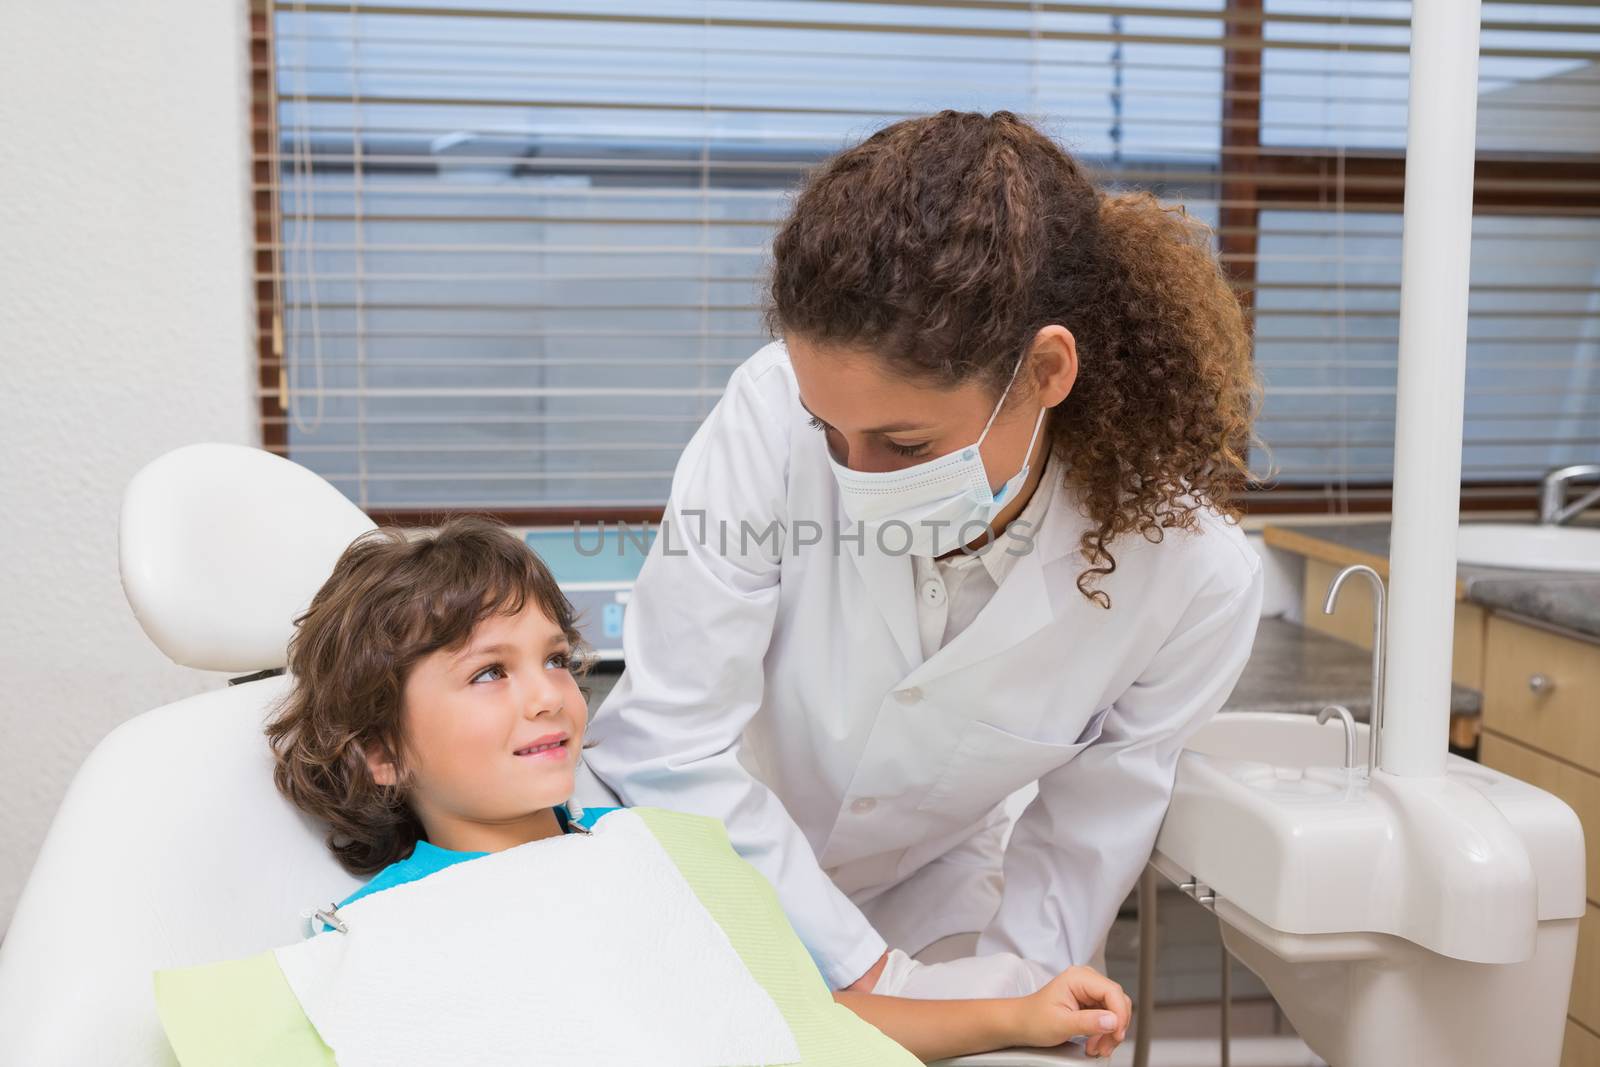 Pediatric dentist smiling down at little boy in chair at the dental clinic